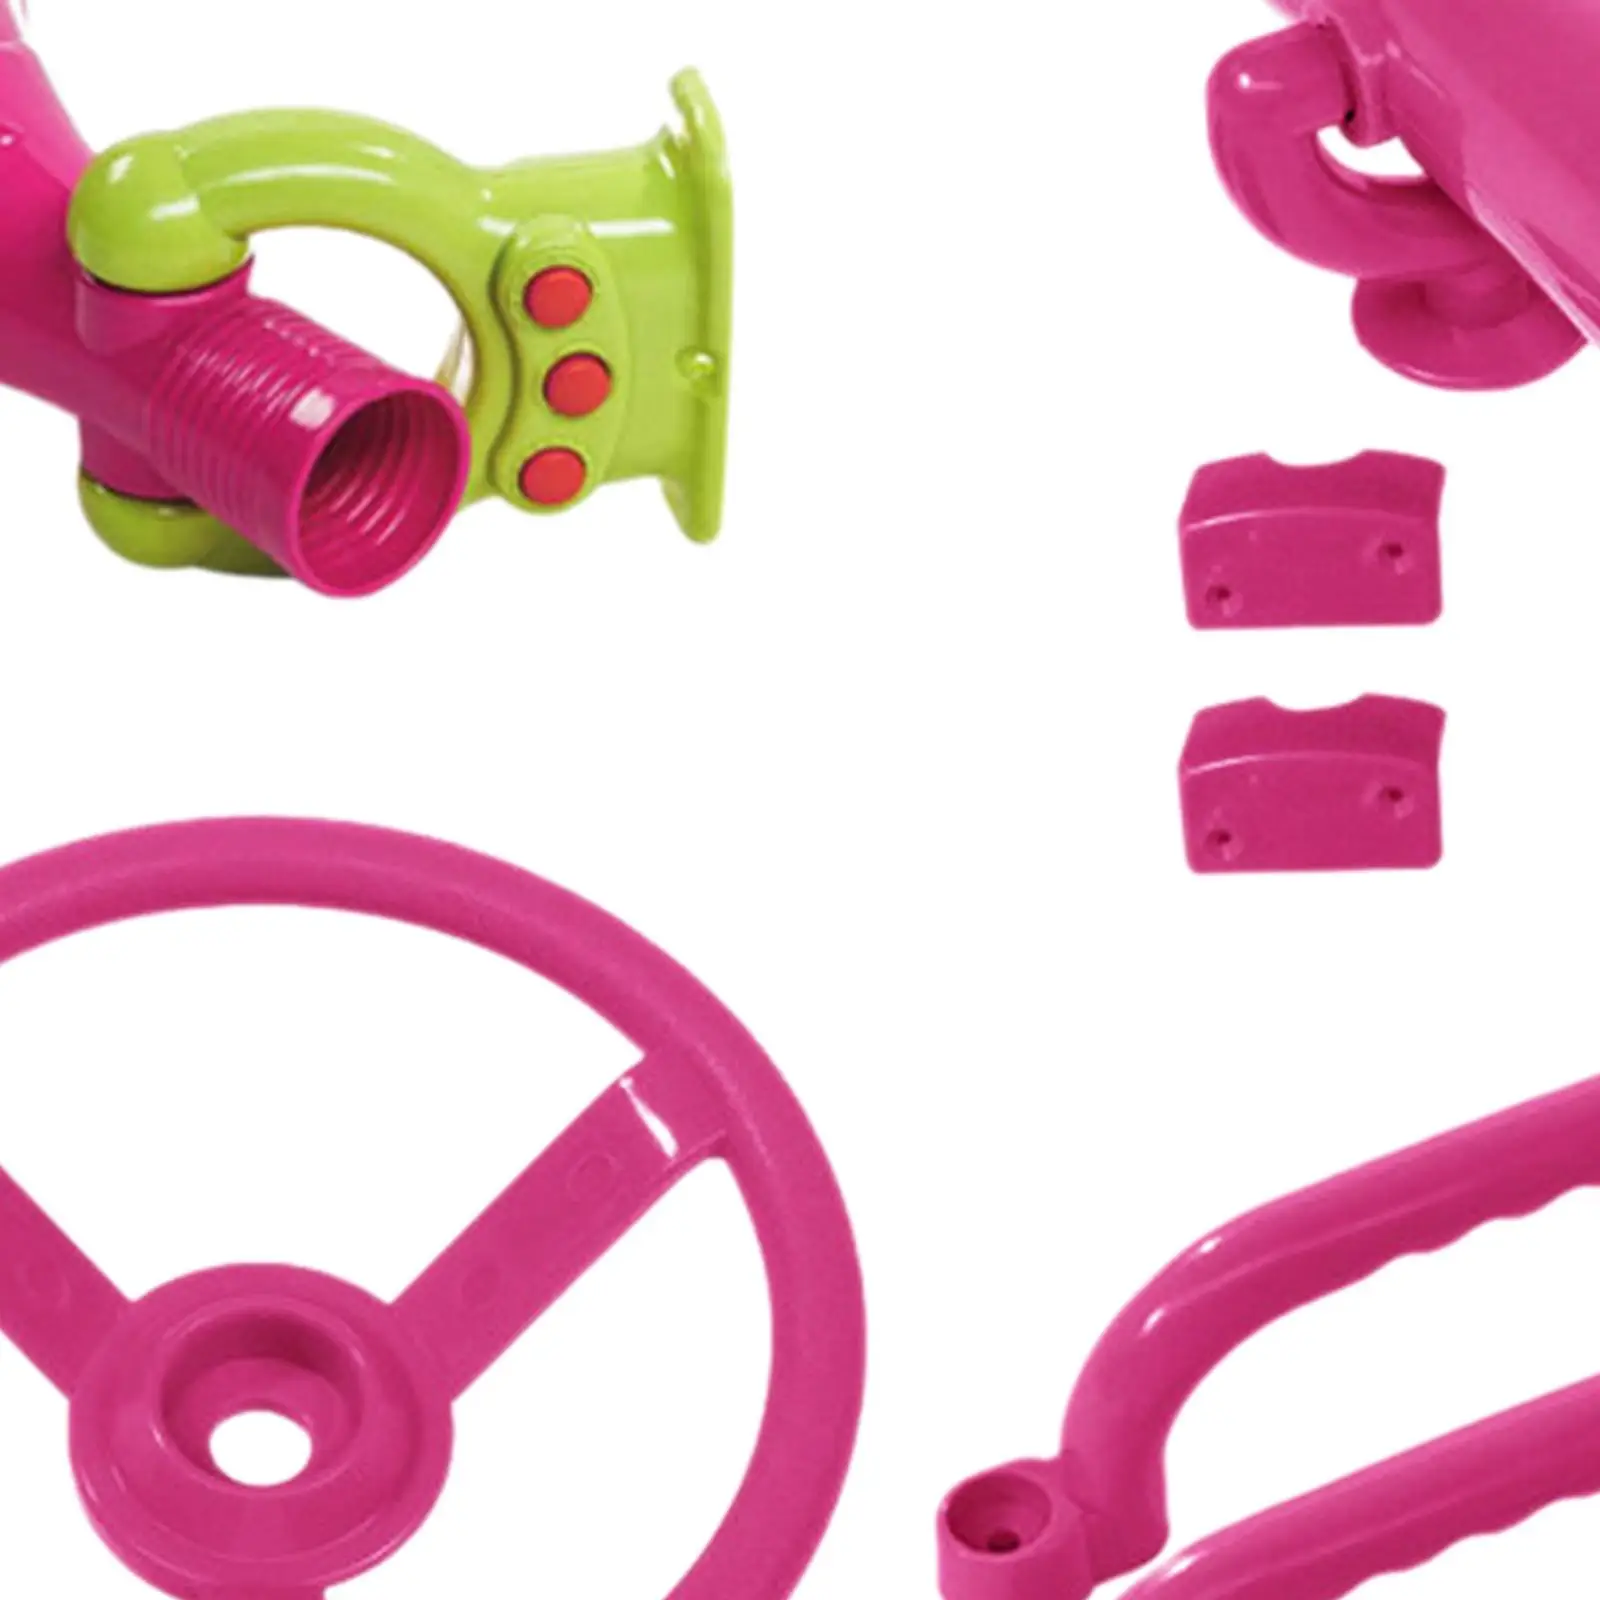 4 Pieces Playground Accessories Pink Pirate Telescope Outdoor Playground Accessories for Swingset Outdoor Playhouse Boys Girls